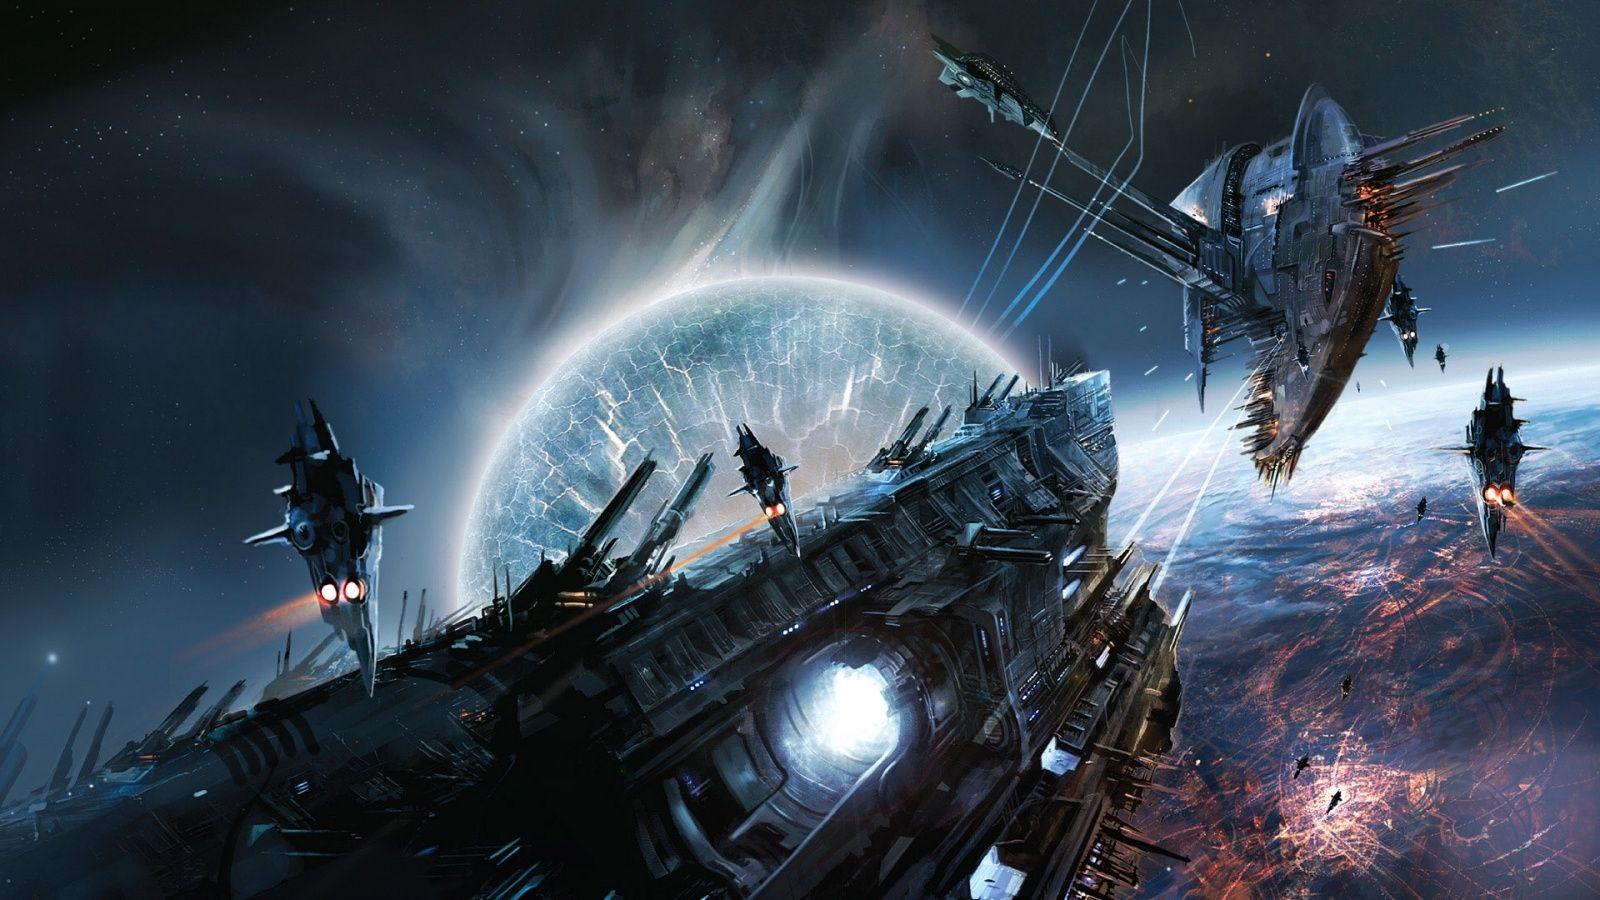 Fantasy Space Spaceships HD Wallpaper 1080p. Download wallpaper page